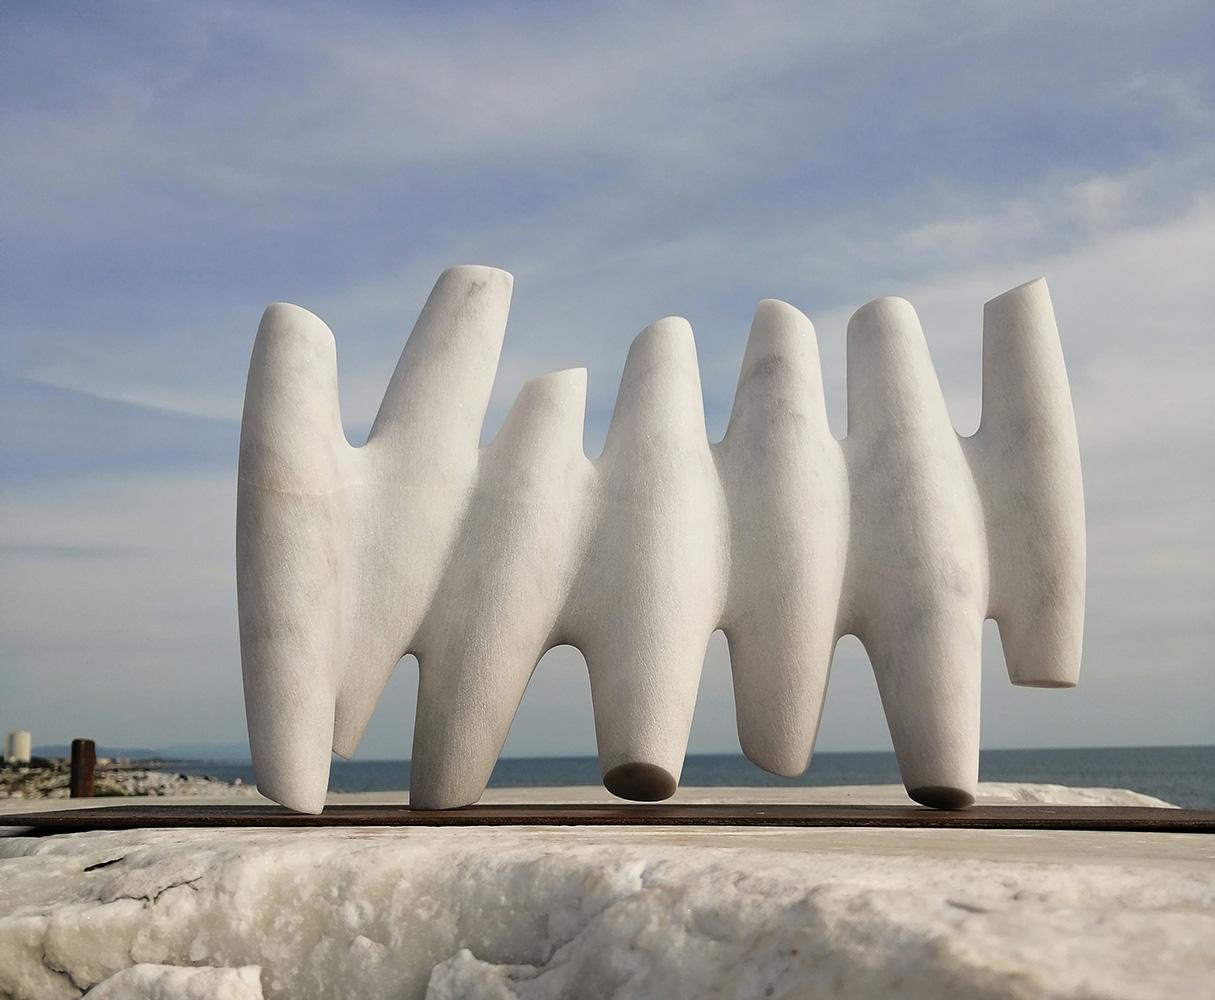 First Connections is a unique white Carrara marble sculpture by contemporary artist Francesca Bernardini, dimensions are 24 × 40 × 10 cm (9.4 × 15.7 × 3.9 in). The sculpture is maintained on the iron base with a rod but it is movable. 
This